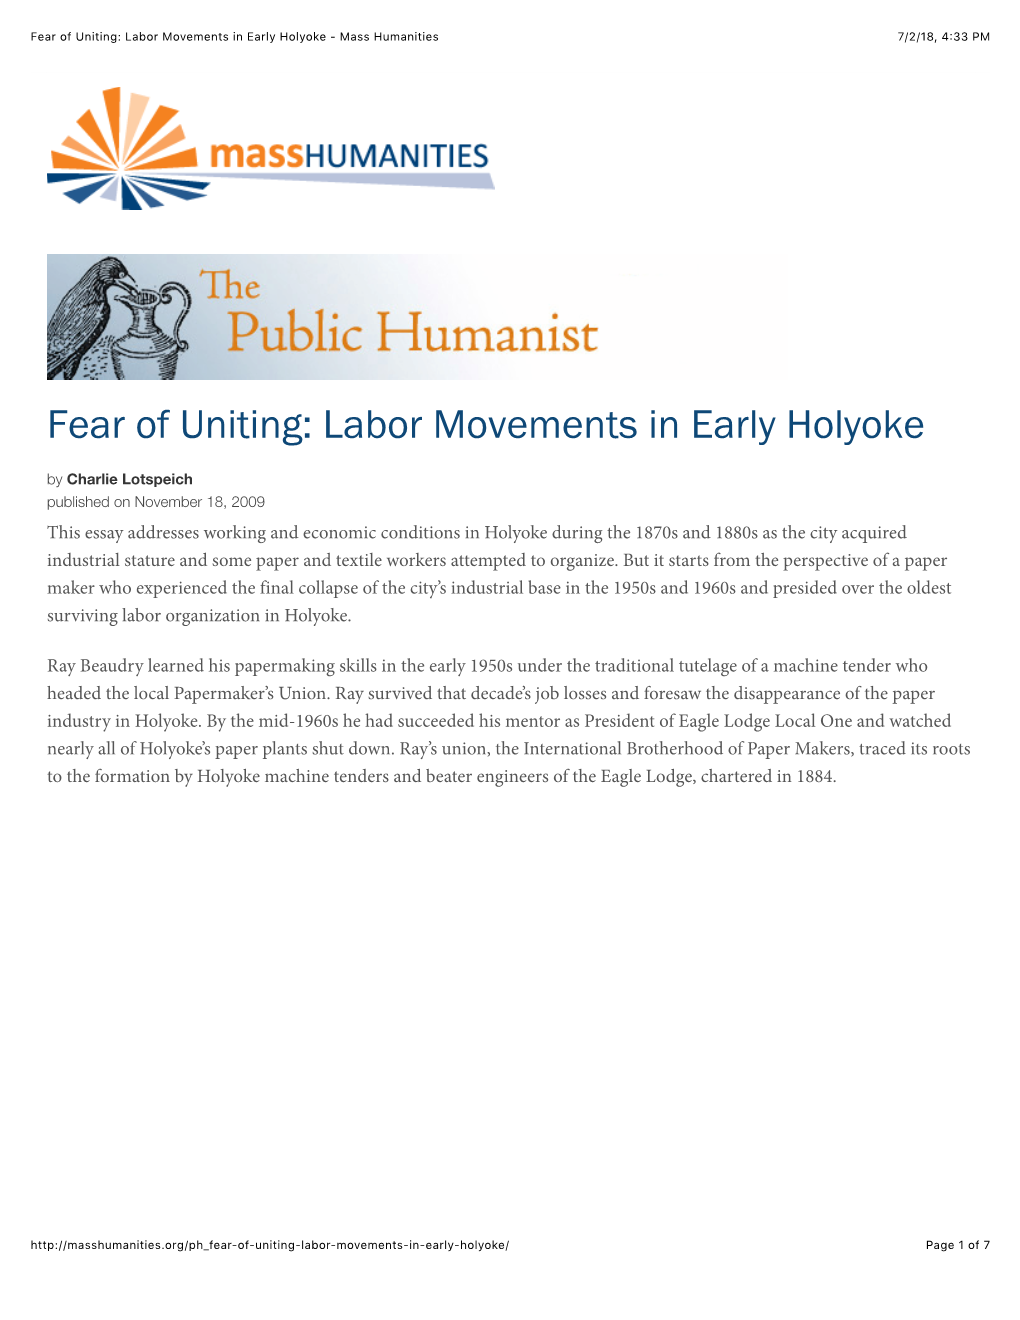 Labor Movements in Early Holyoke - Mass Humanities 7/2/18, 4)33 PM